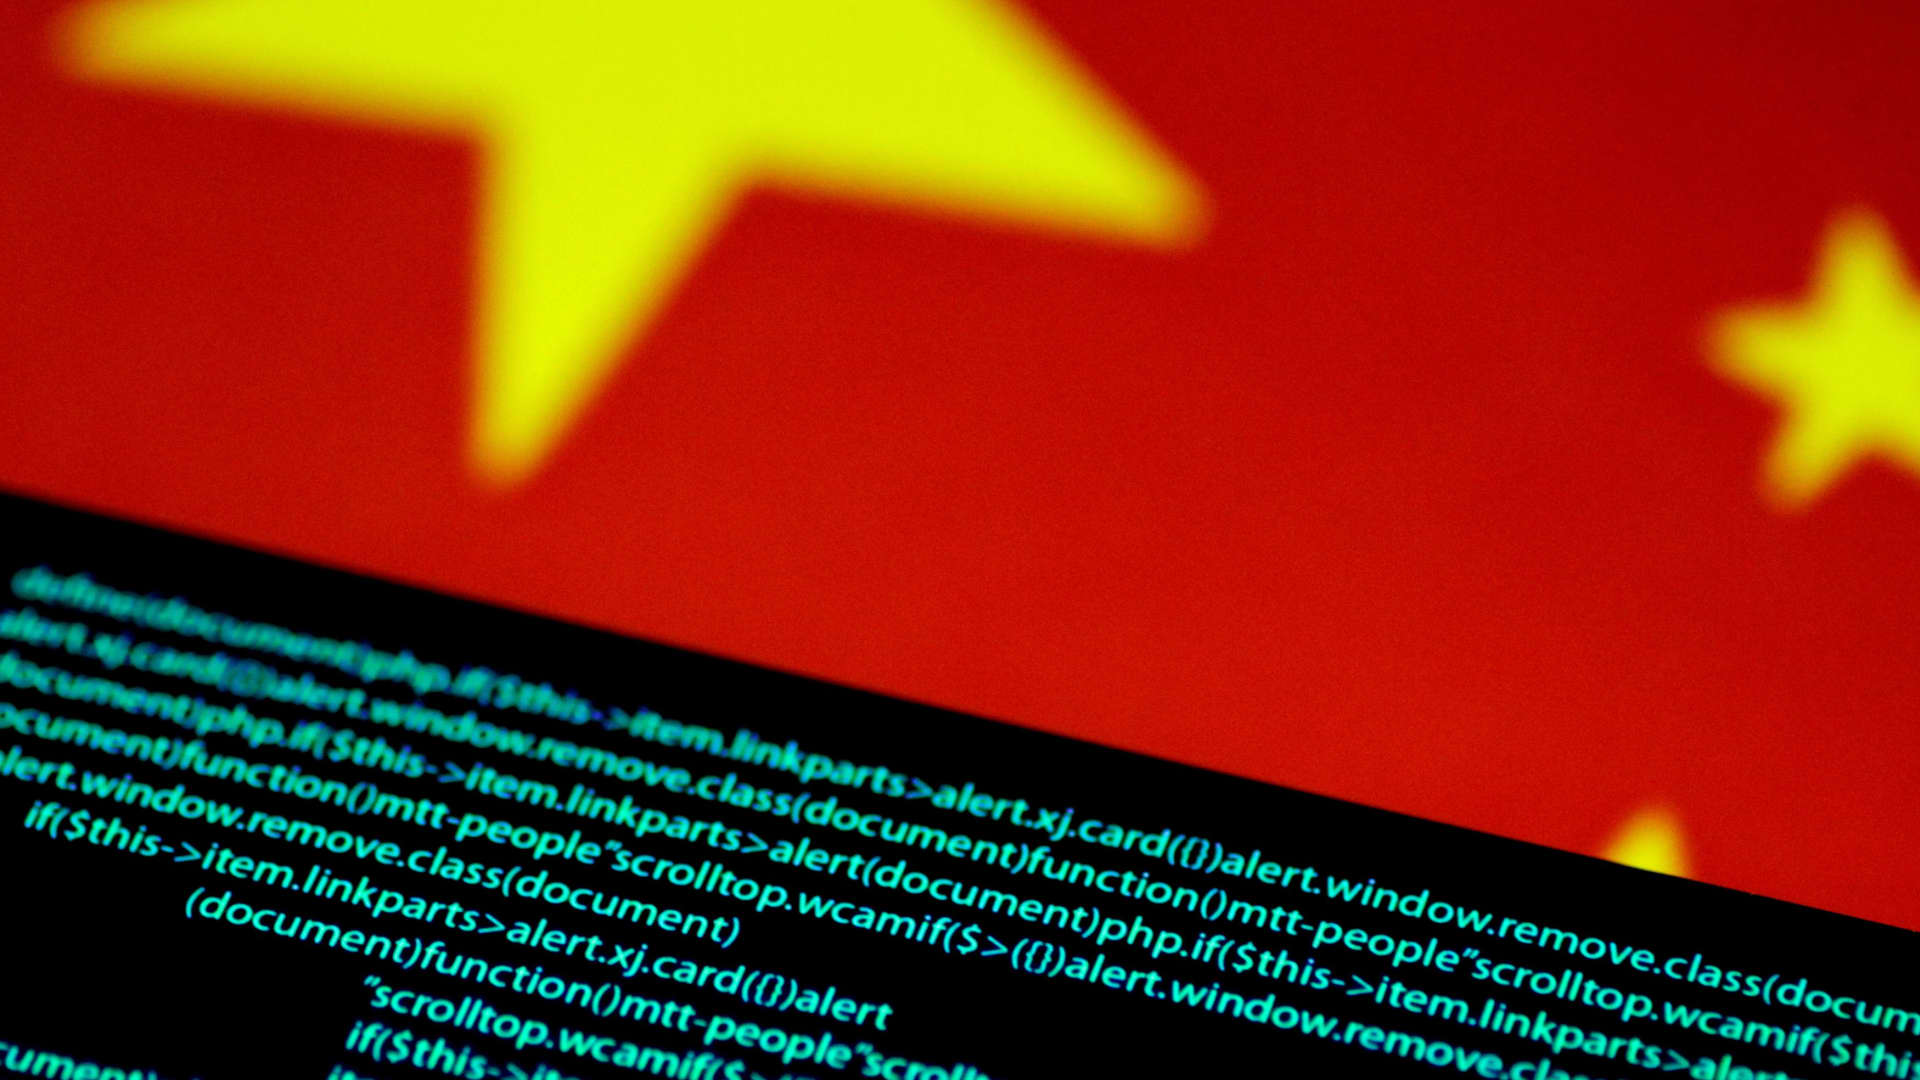 Meta says it has disrupted a massive disinformation campaign linked to Chinese law enforcement